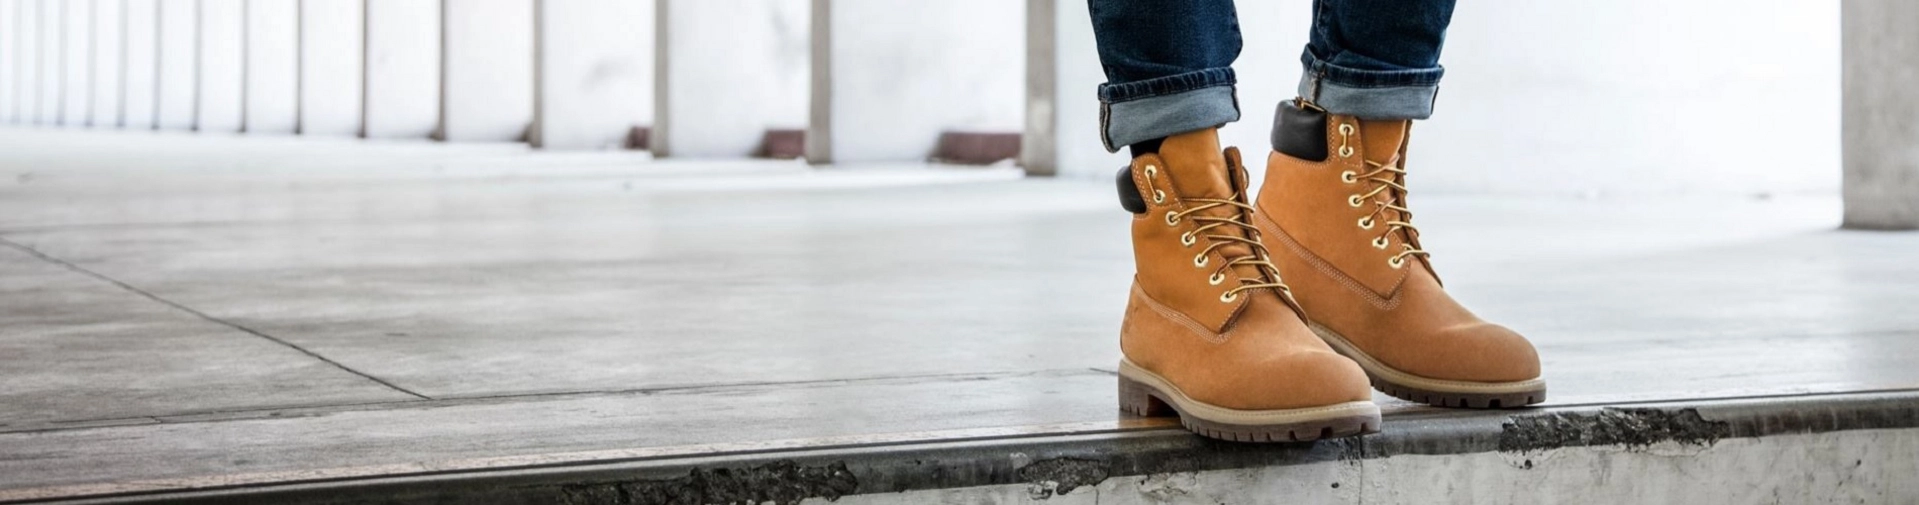 Voir la collection Timberland